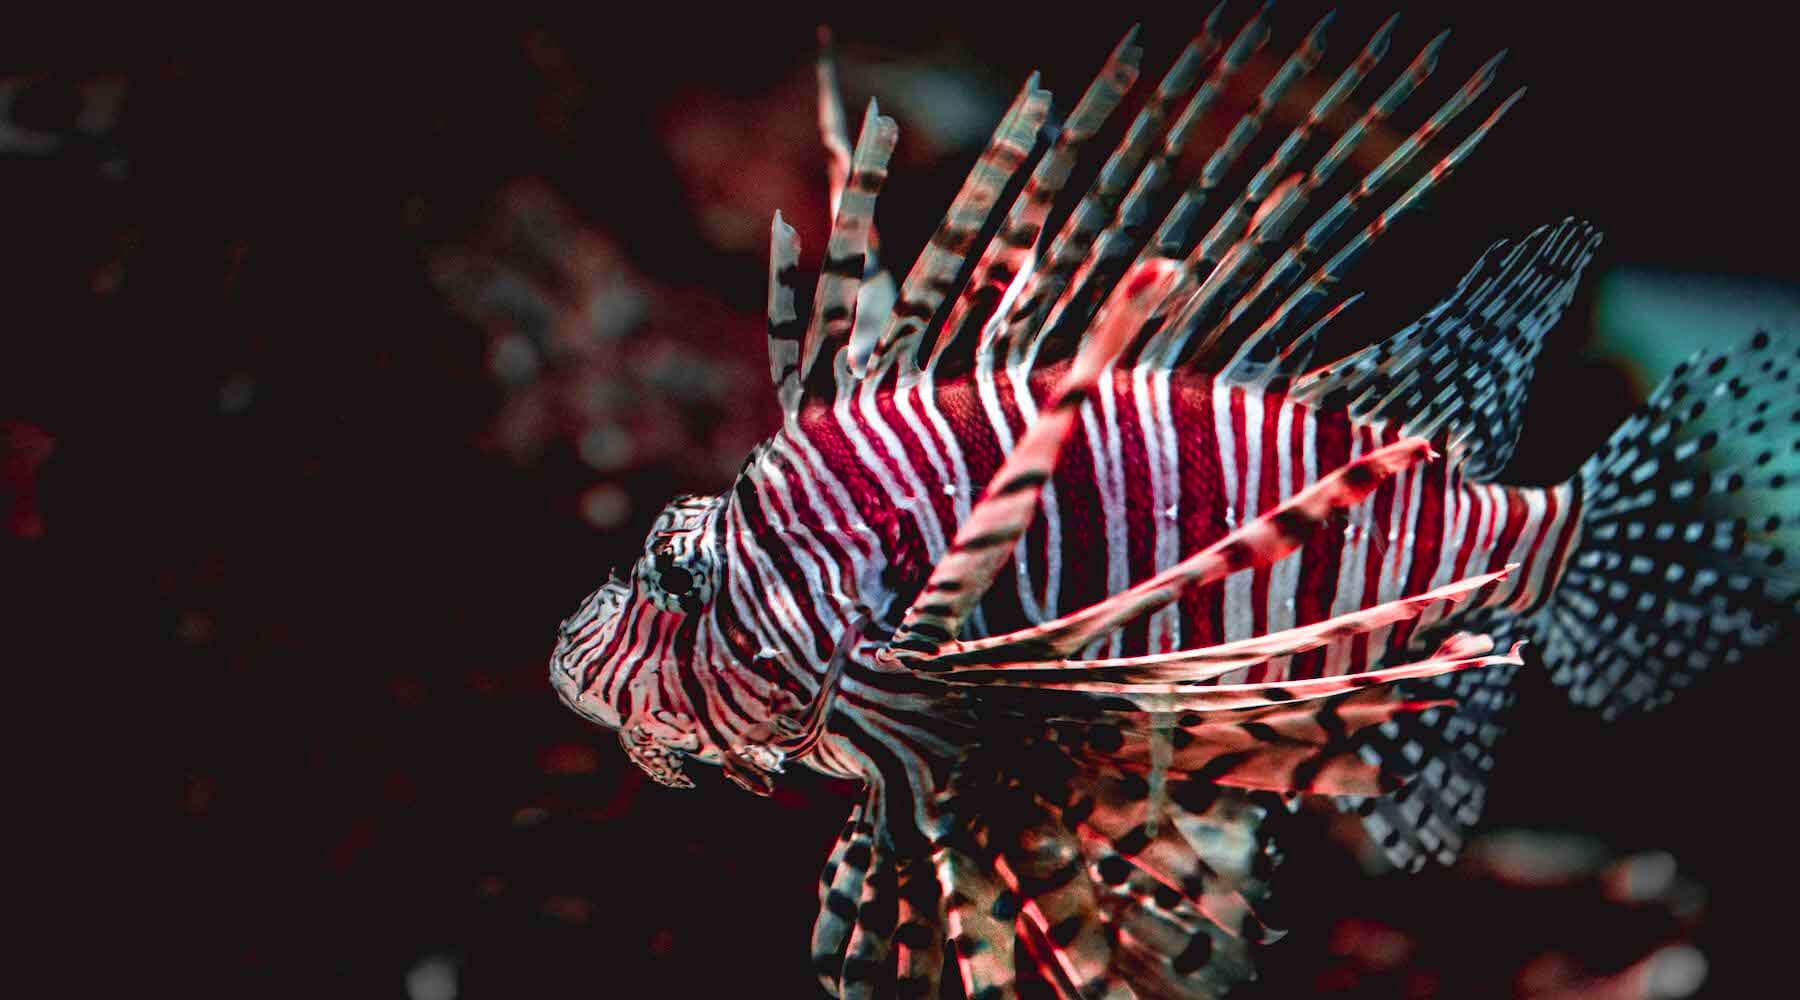 Invasive lionfish inspired printed apparel gear